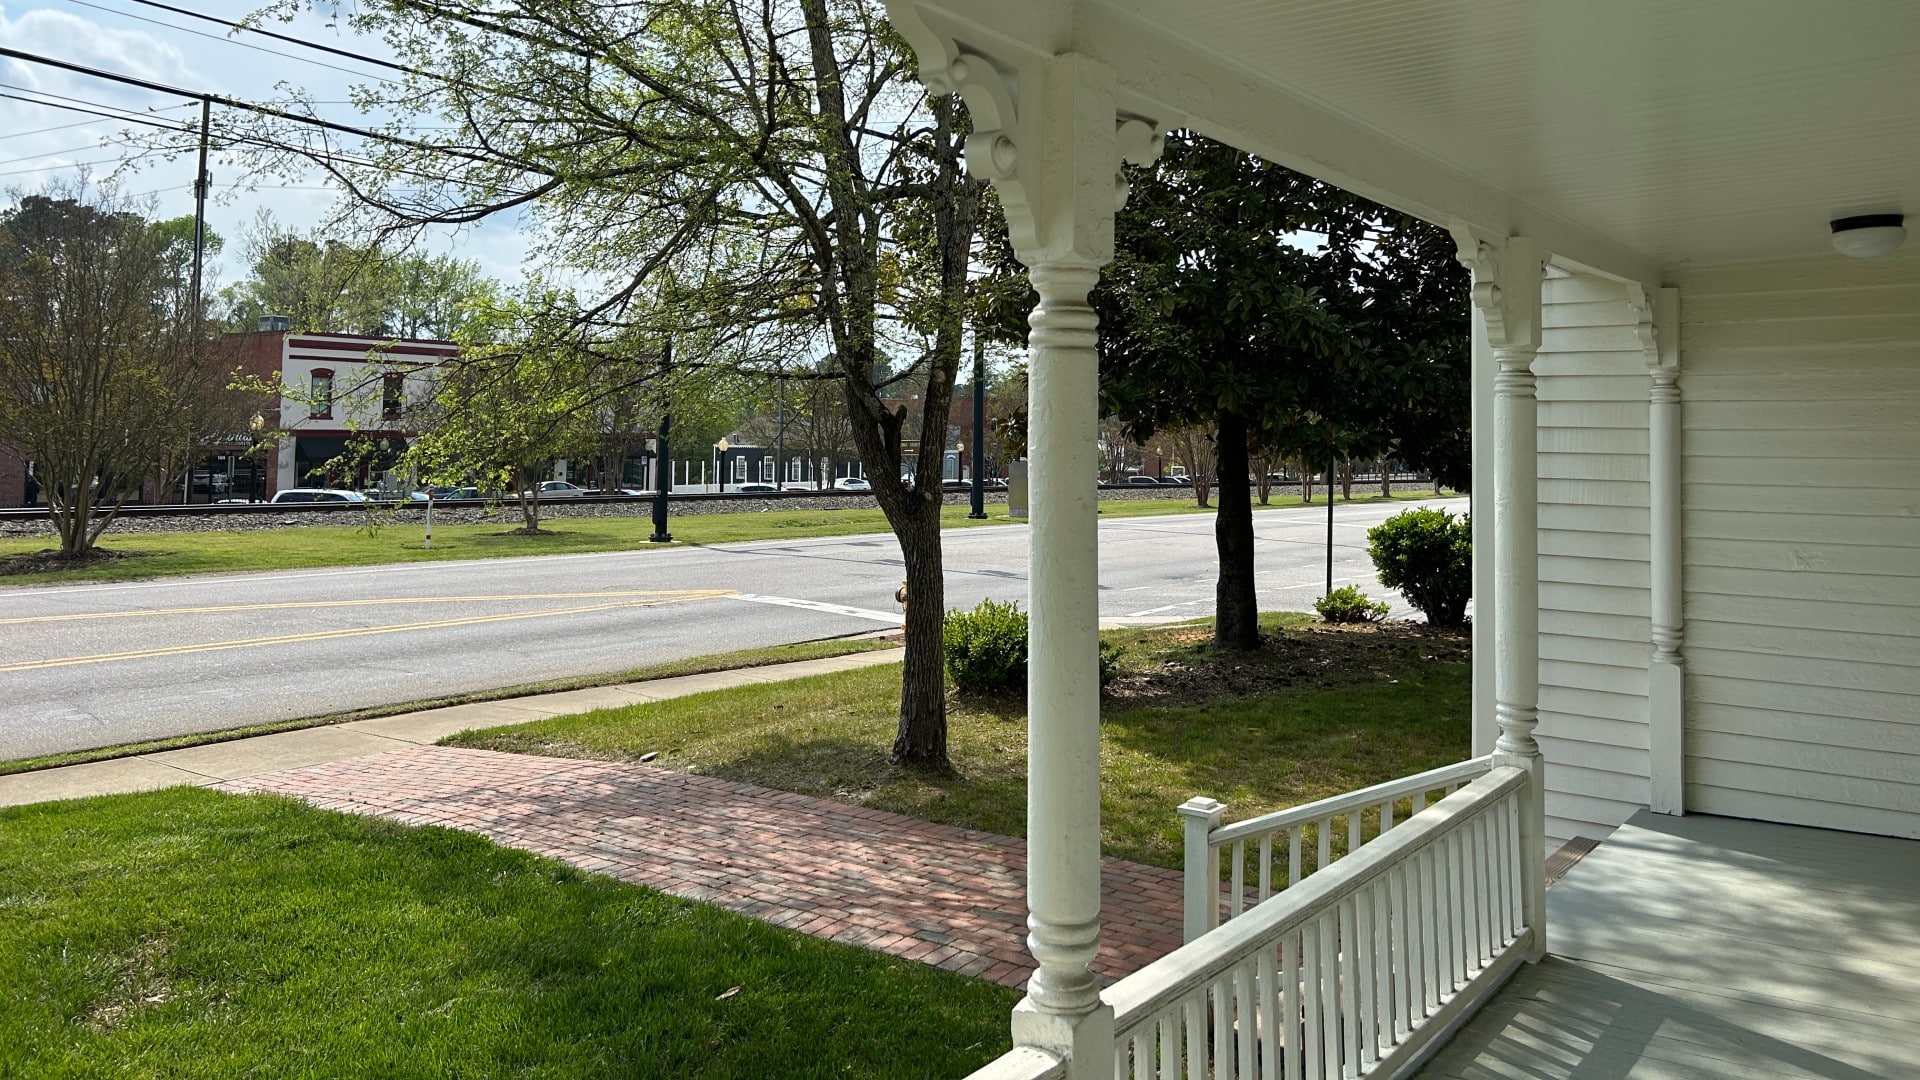 A front porch of a white home facing a street with a row of buildings beyond some trees